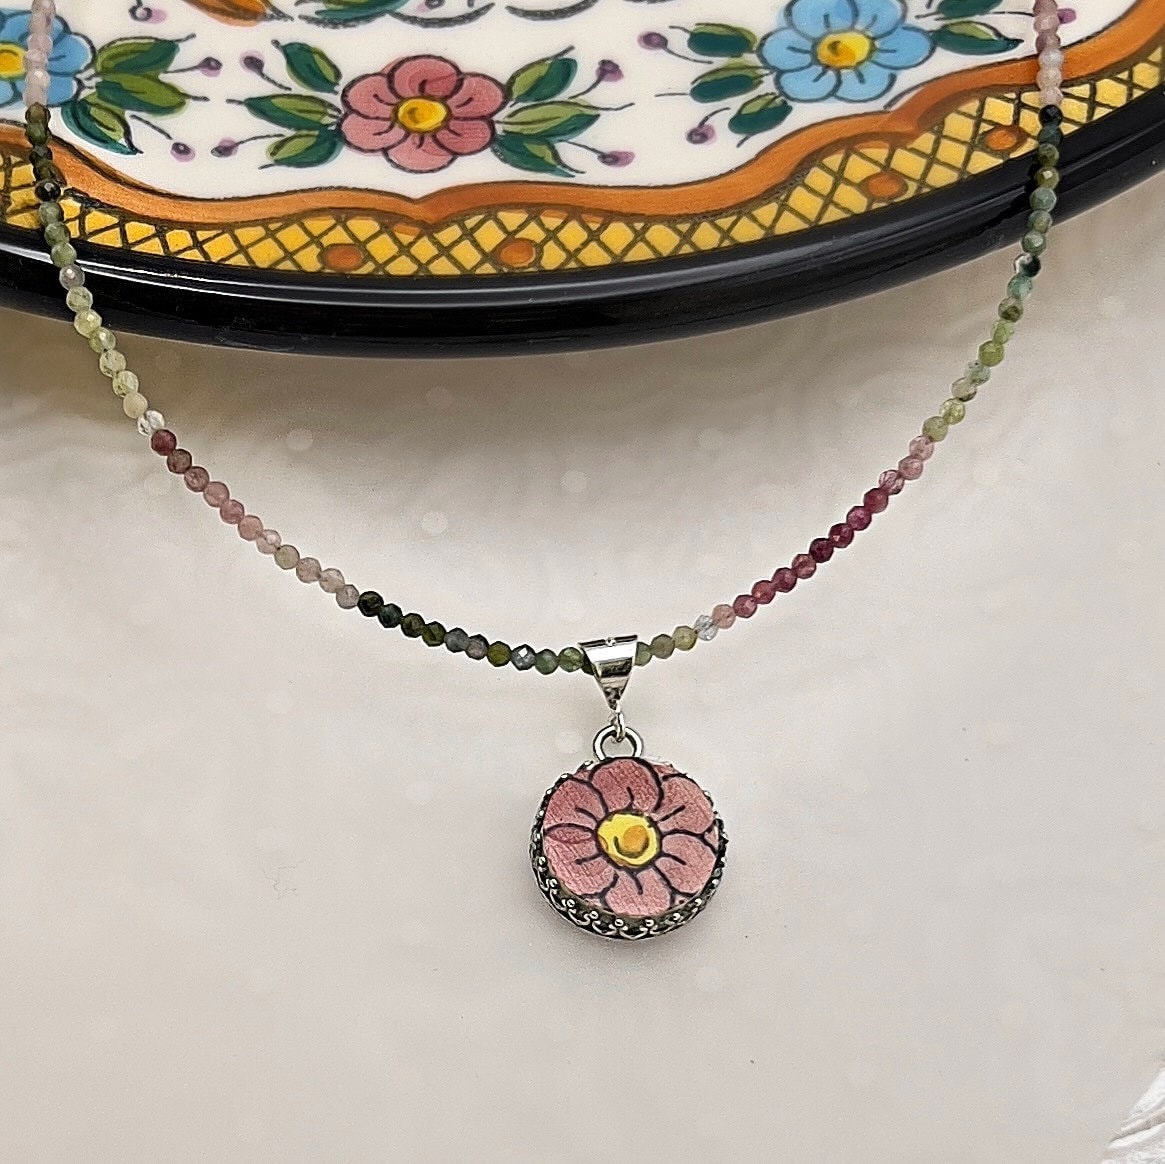 Dainty Pink Flower Necklace, Broken China Beaded Gemstone Jewelry, 9th Anniversary Pottery Gift for Wife